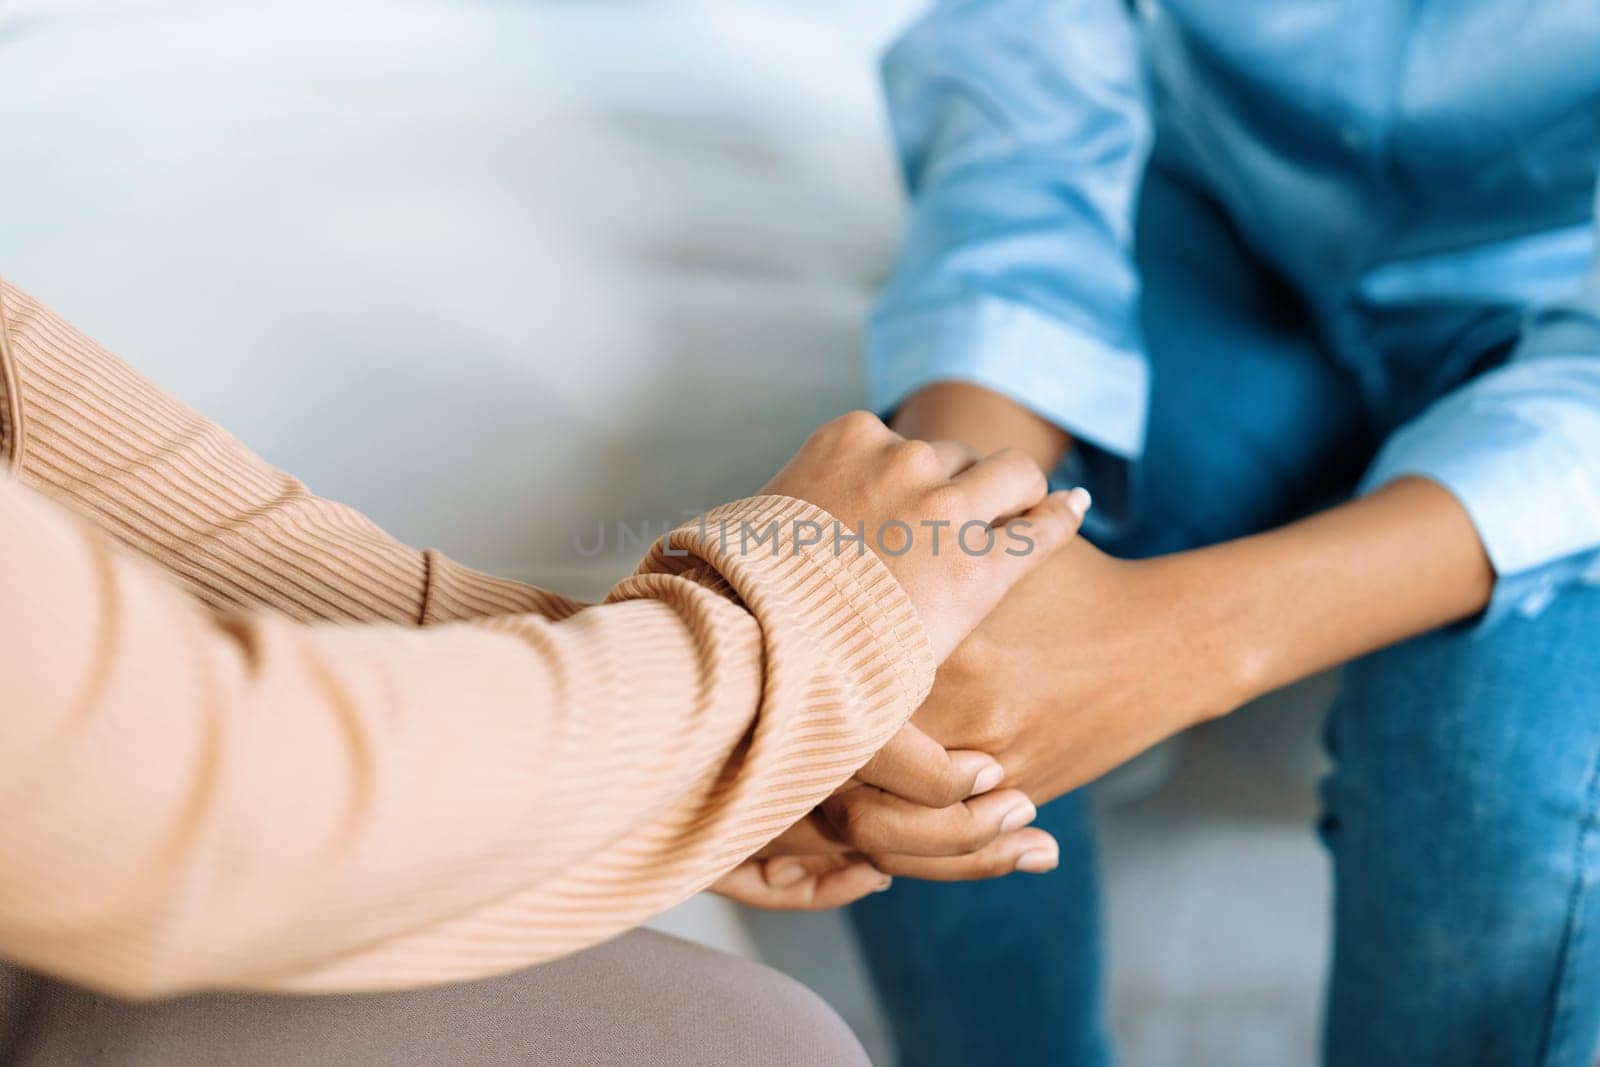 Close up shot of supportive and comforting hands for cheering up depressed patient person or stressed mind with crucial empathy